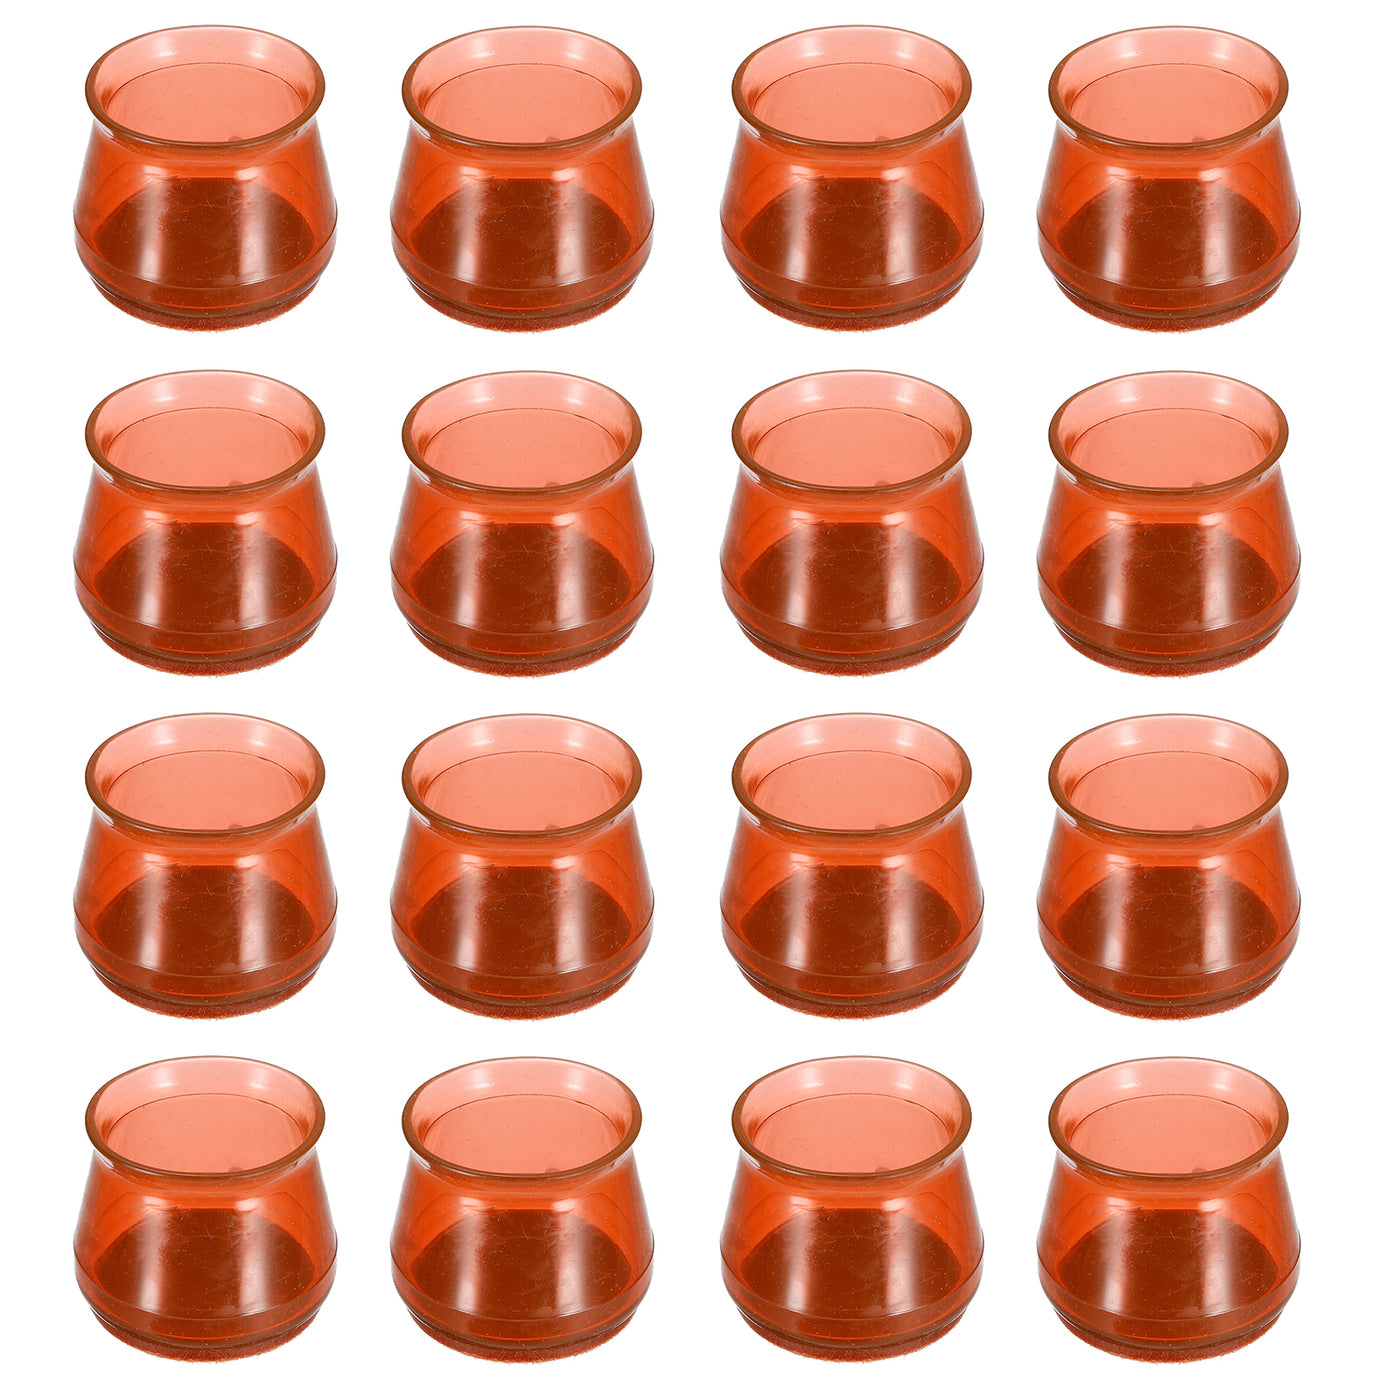 uxcell Uxcell Chair Leg Floor Protectors, 24Pcs 39mm/ 1.54" Silicone & Felt Chair Leg Cover Caps for Hardwood Floors (Walnut)